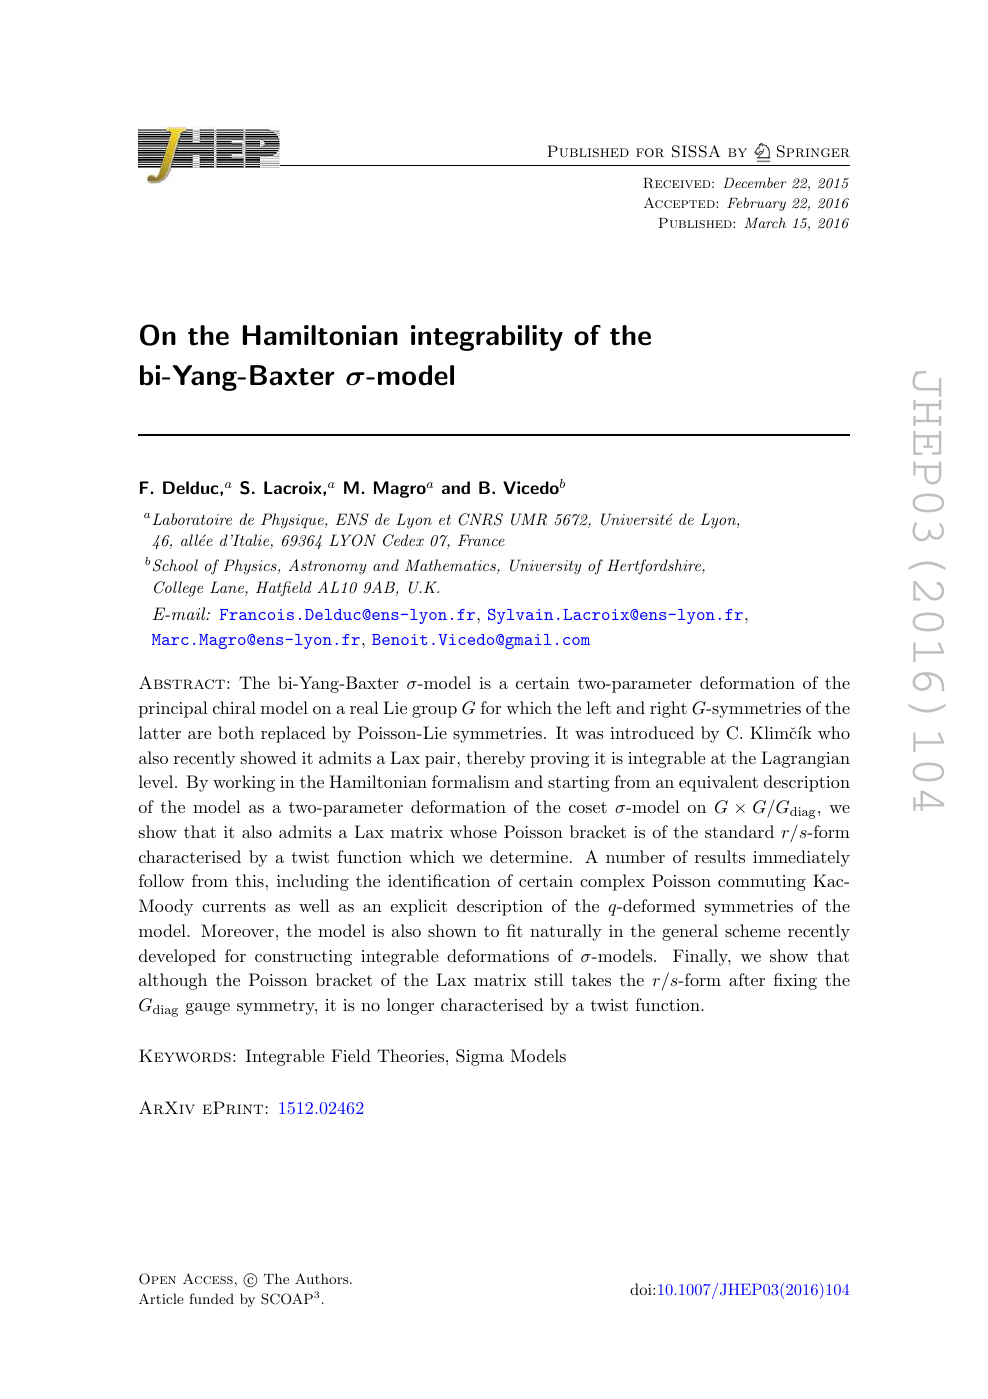 On The Hamiltonian Integrability Of The Bi Yang Baxter S Model Topic Of Research Paper In Physical Sciences Download Scholarly Article Pdf And Read For Free On Cyberleninka Open Science Hub